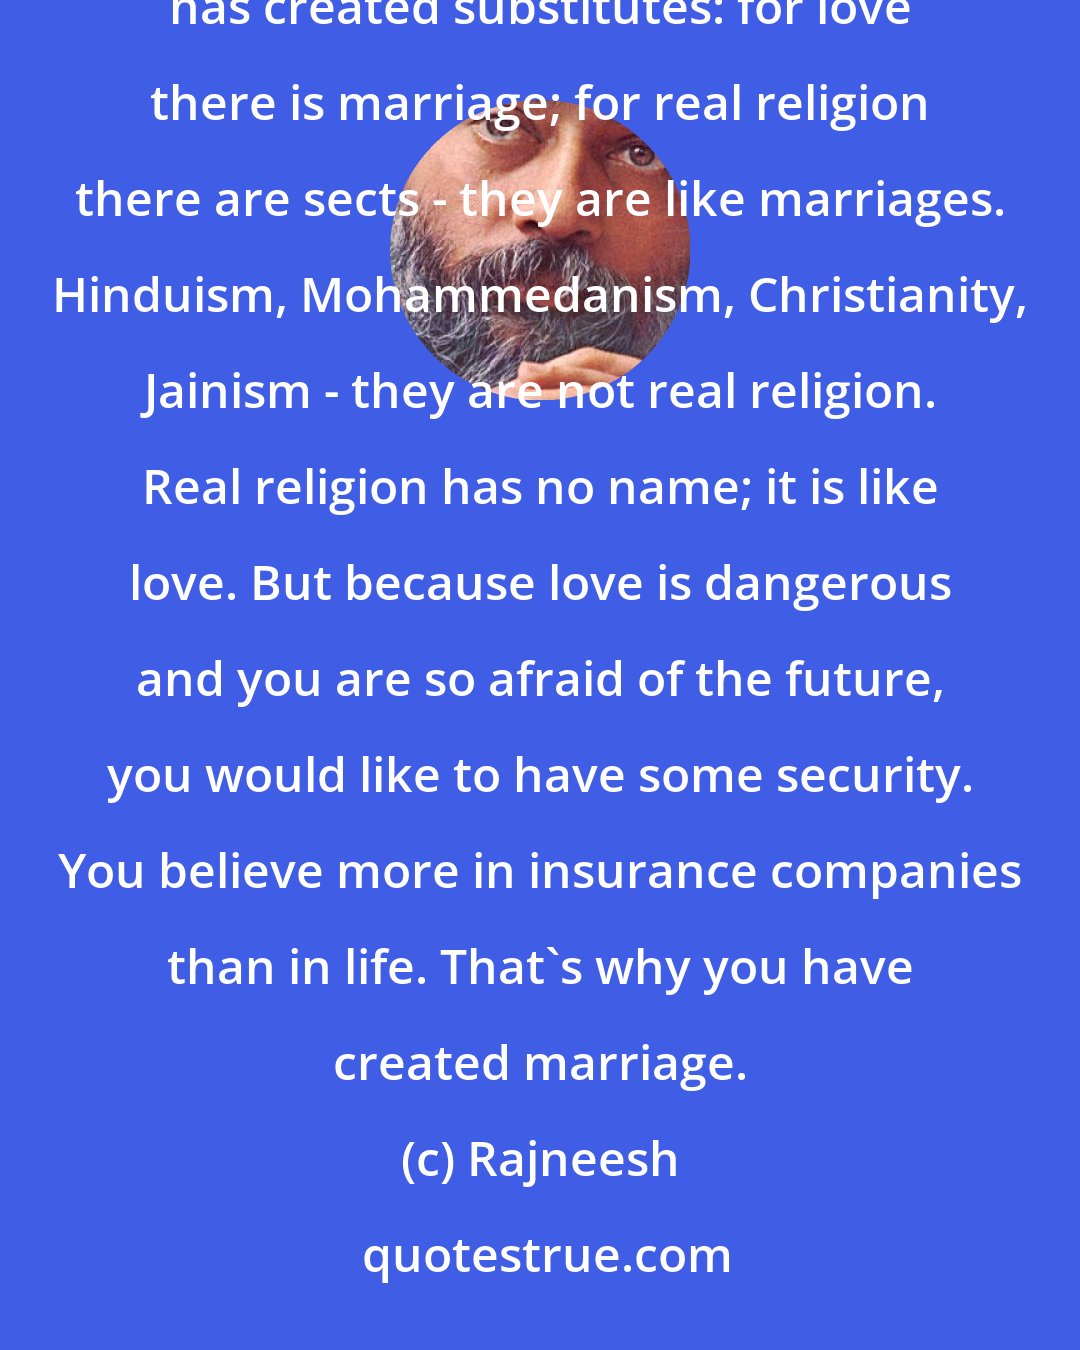 Rajneesh: Man has to create marriage because man is afraid of the unknown. On all levels of life and existence, man has created substitutes: for love there is marriage; for real religion there are sects - they are like marriages. Hinduism, Mohammedanism, Christianity, Jainism - they are not real religion. Real religion has no name; it is like love. But because love is dangerous and you are so afraid of the future, you would like to have some security. You believe more in insurance companies than in life. That's why you have created marriage.